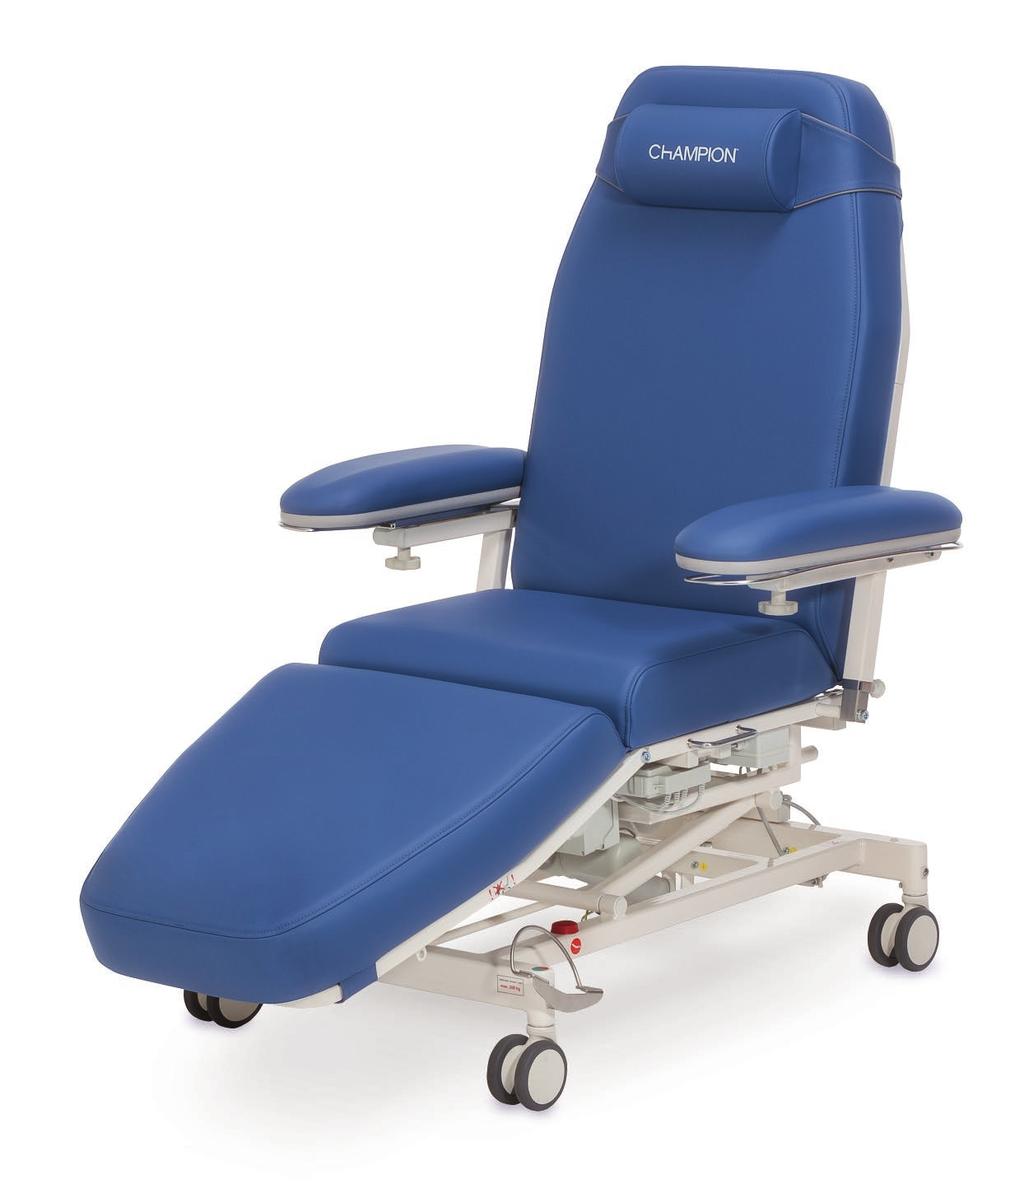 Comfort-4 ECO MULTI-PURPOSE HEALTHCARE CHAIR RATED UP TO 440 LBS.